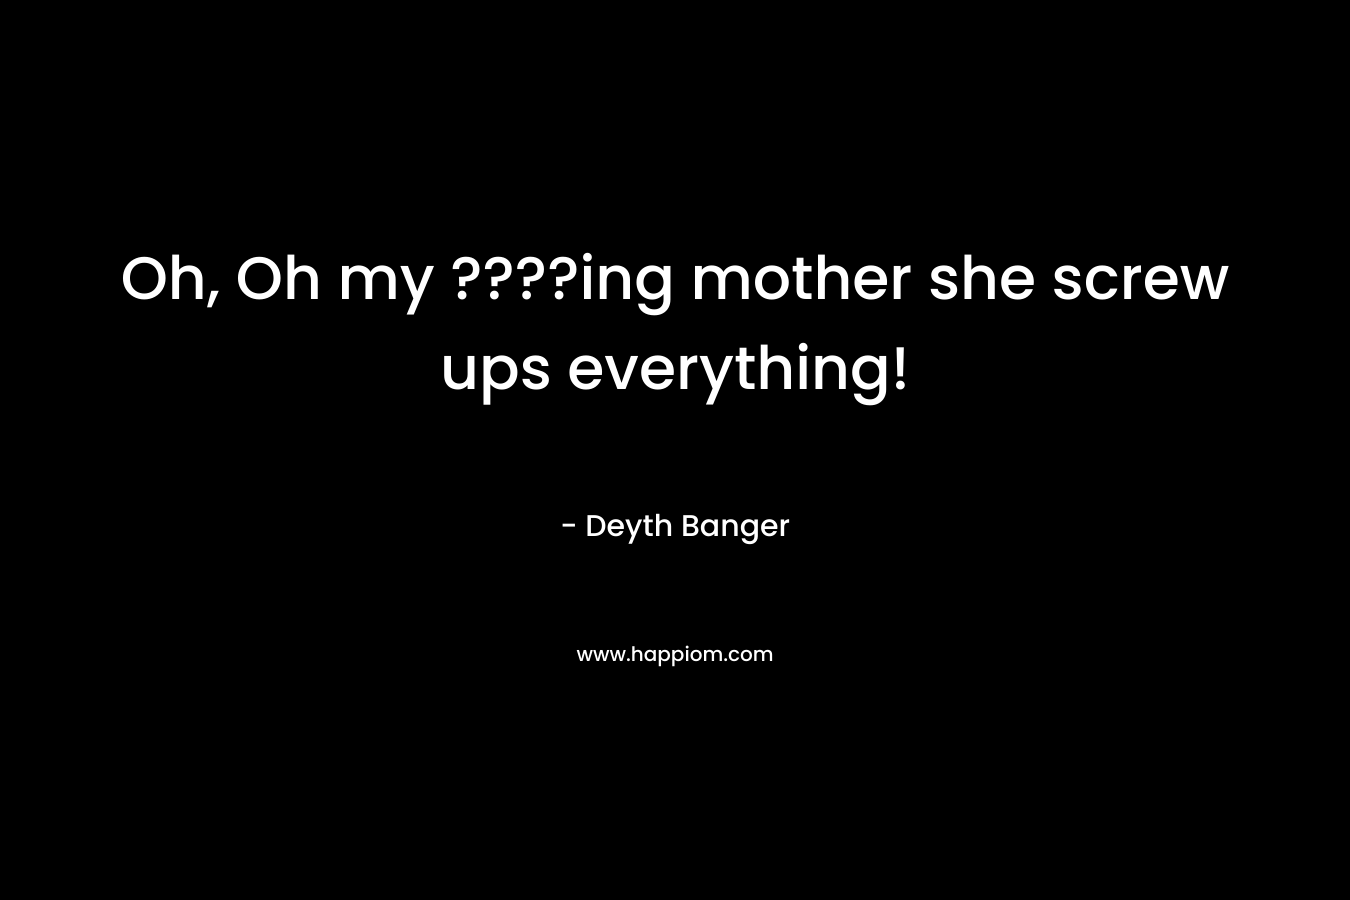 Oh, Oh my ????ing mother she screw ups everything!